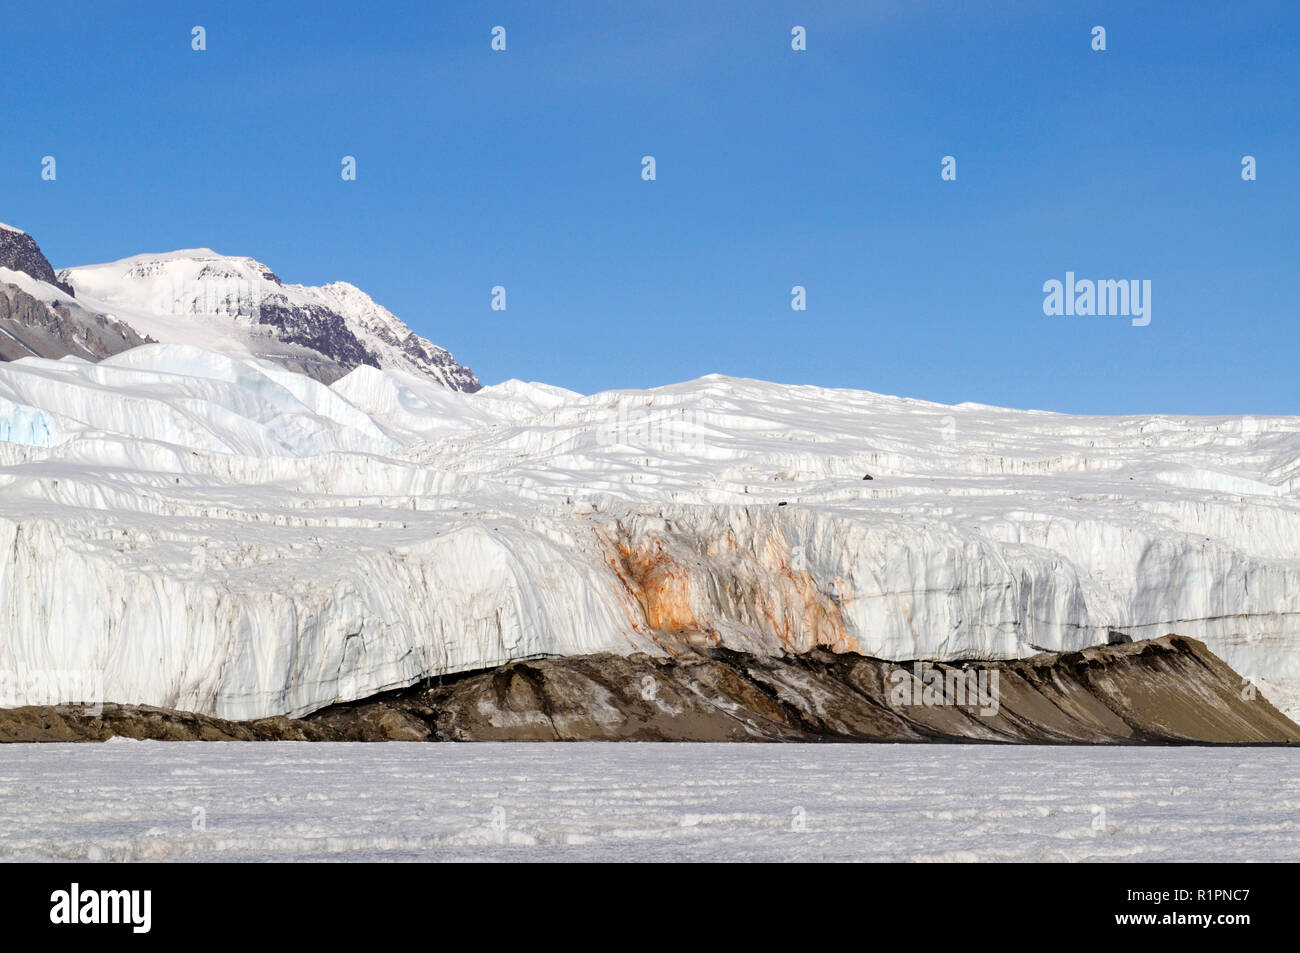 Blood Falls is a reddish colored salty iron rich discharge that emerges from the Taylor Glacier,Taylor Valley, McMurdo Dry Valleys, Antarctica Stock Photo